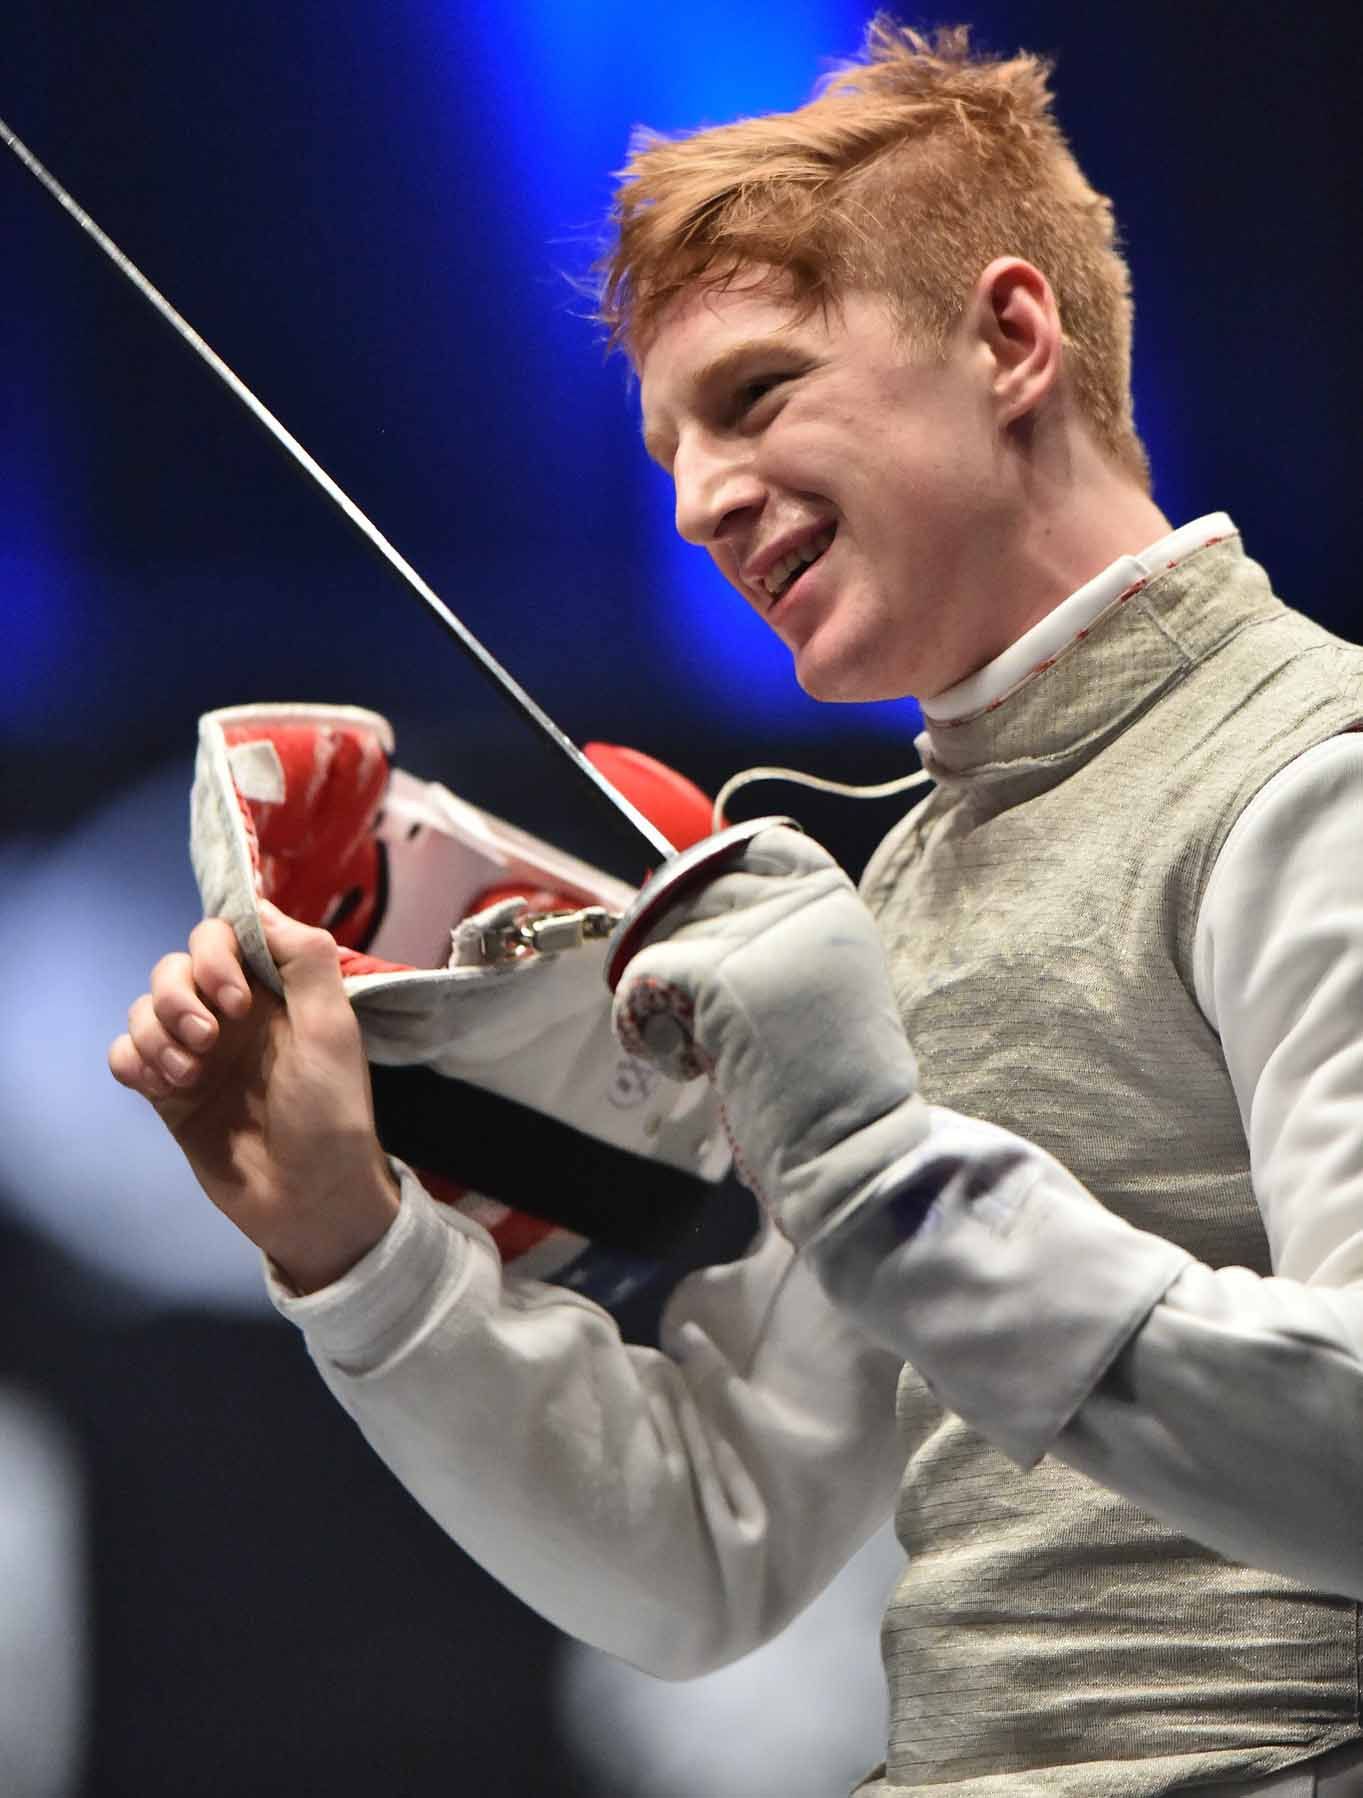 race imboden, fencing, olympics